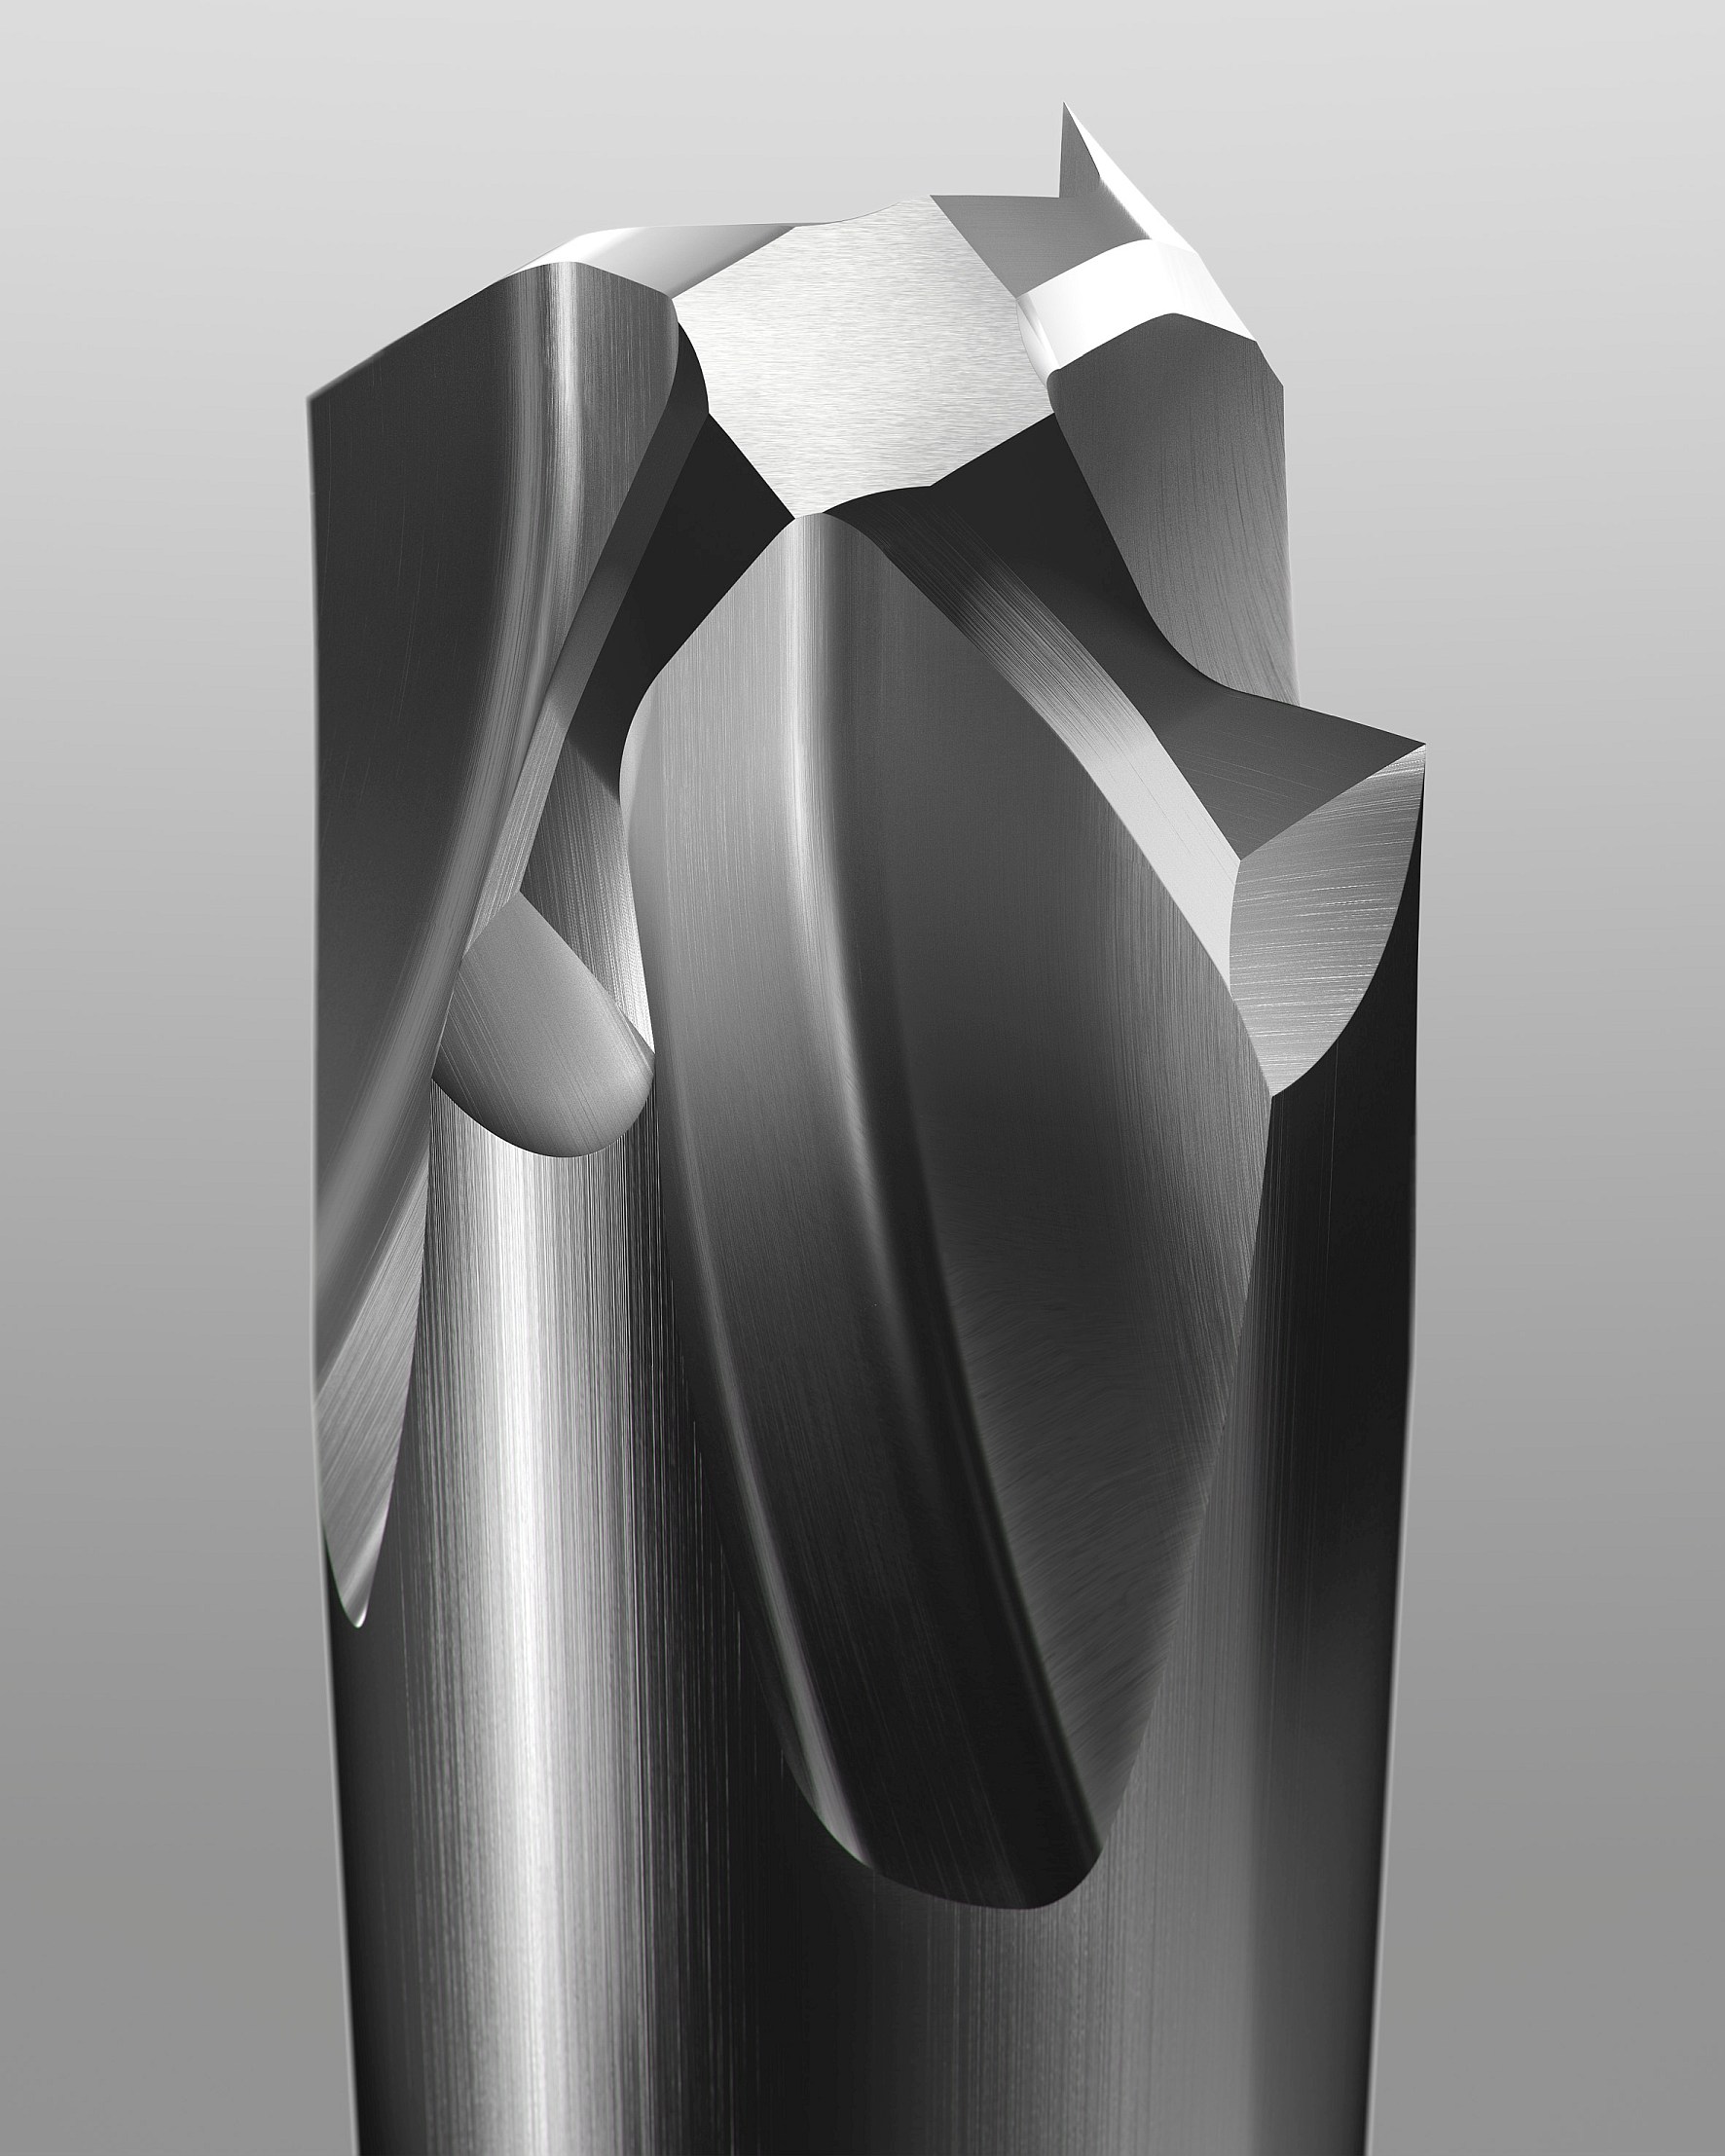 Numerous innovations and further developments will also be presented in the area of deburring tools, for example the world's first chamfer milling cutter with a V-shaped cutting edge that completely avoids secondary burrs. © Kempf